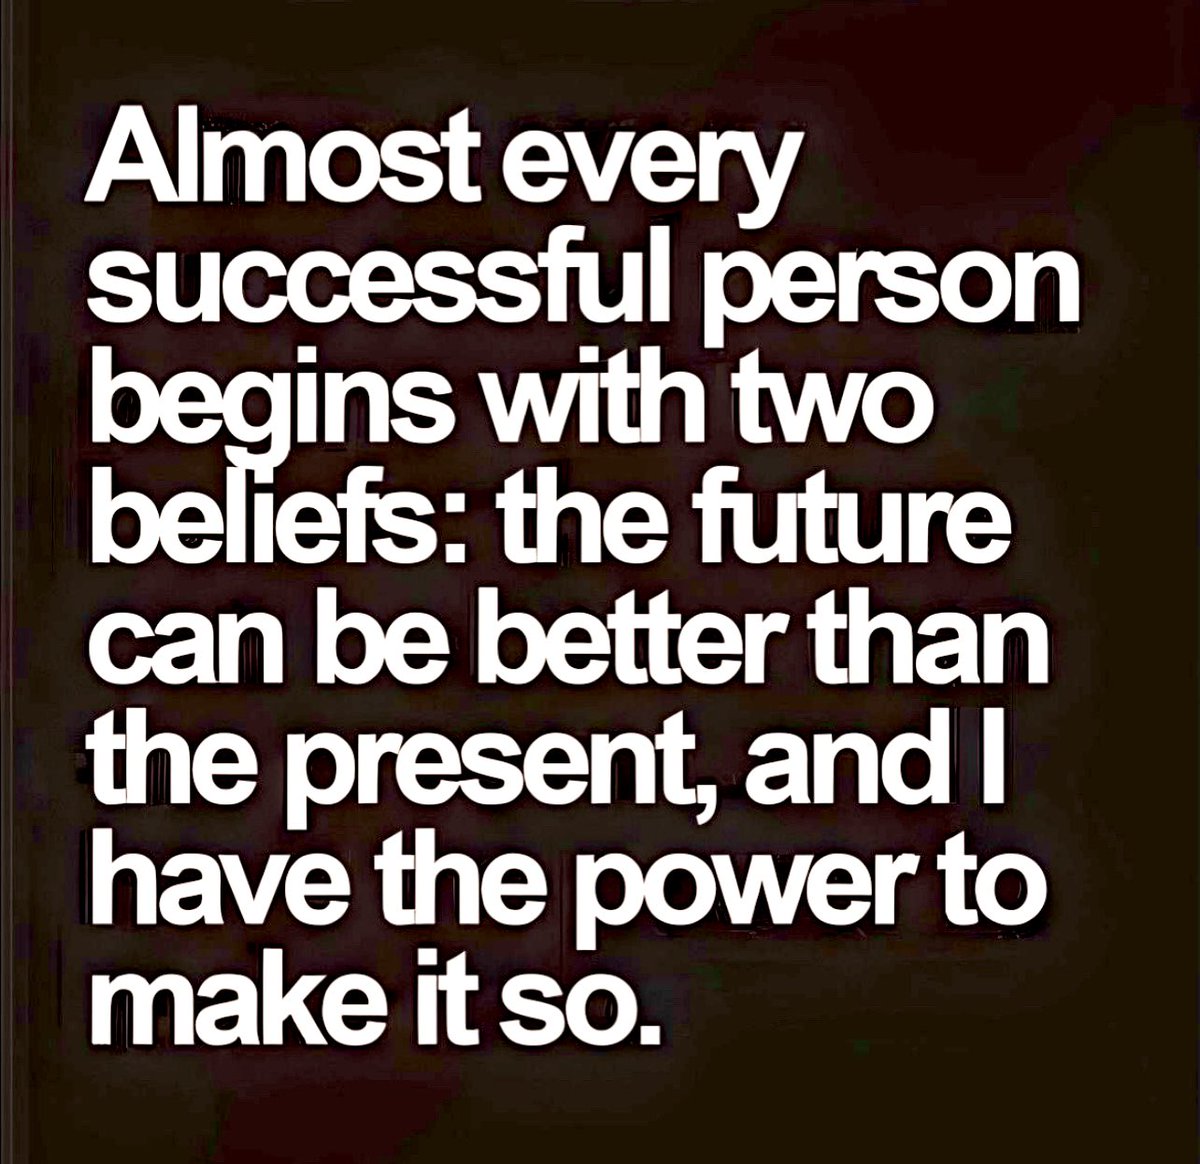 Happy Wednesday and your daily dose of inspiration!💕

Almost every successful person begins with the belief that the future can be better than the present and they can make it so. 💕

Grateful for the opportunity to live, love, and lead.💕

#ALLmeansALL #GreenfieldGuarantee…